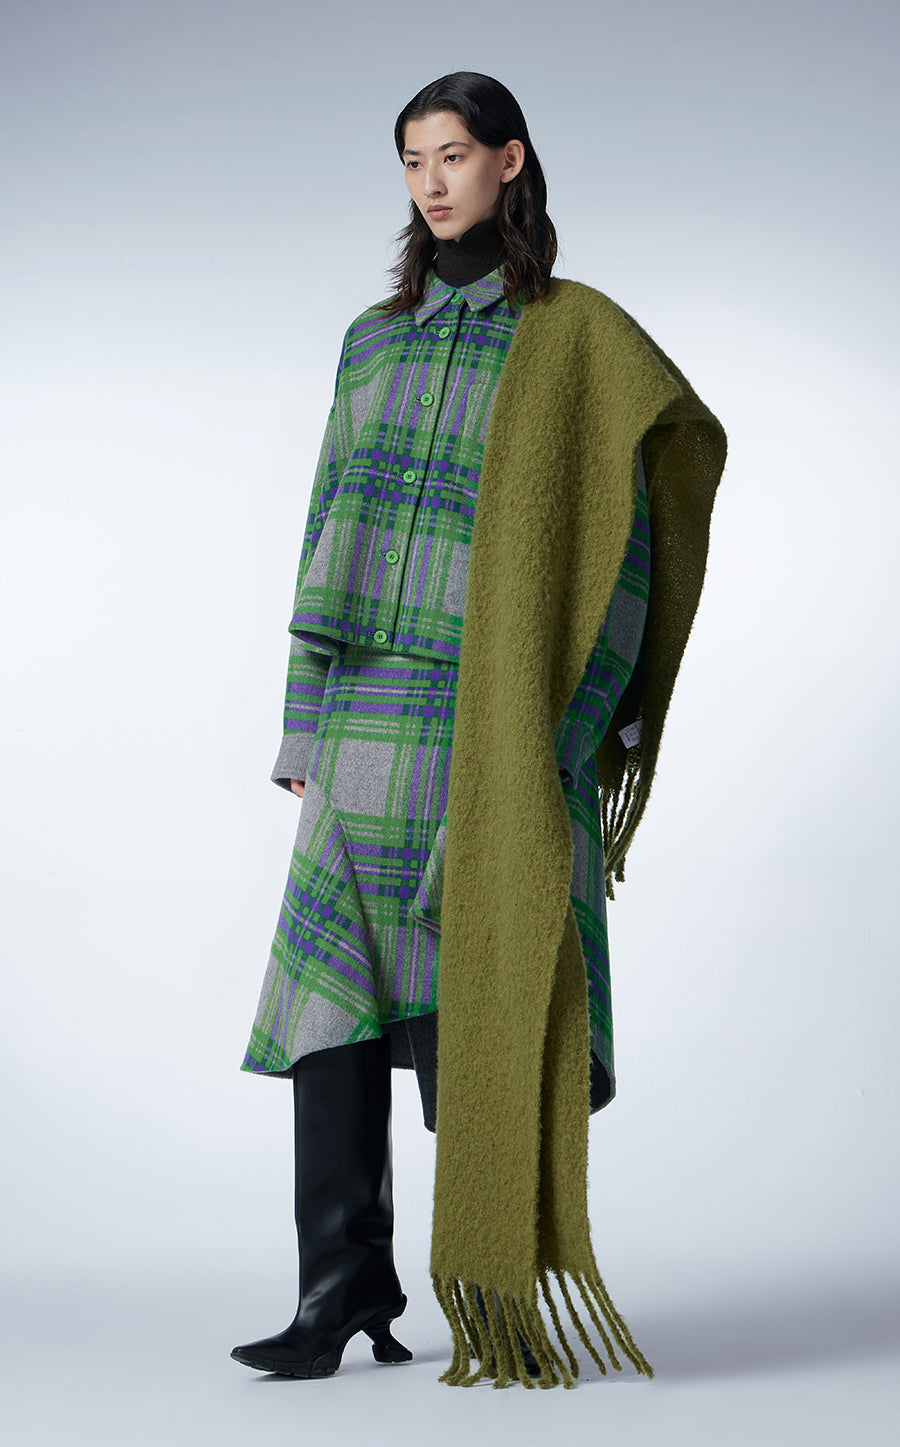 Coat / JNBY Relaxed Wool Jacket in Plaid Pattern